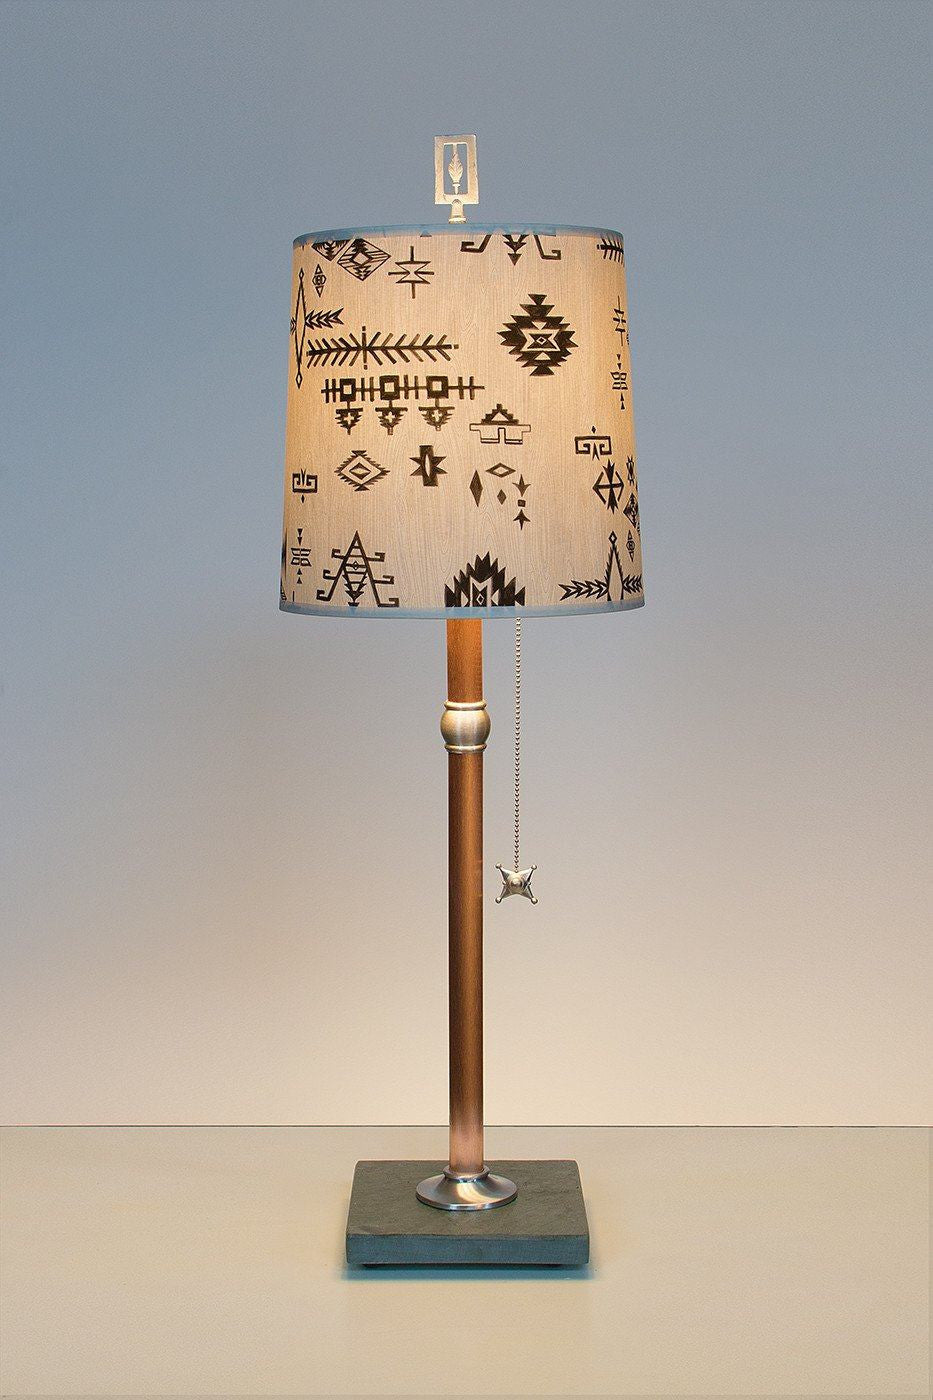 Copper Table Lamp with Medium Drum Shade in Blanket Sketch